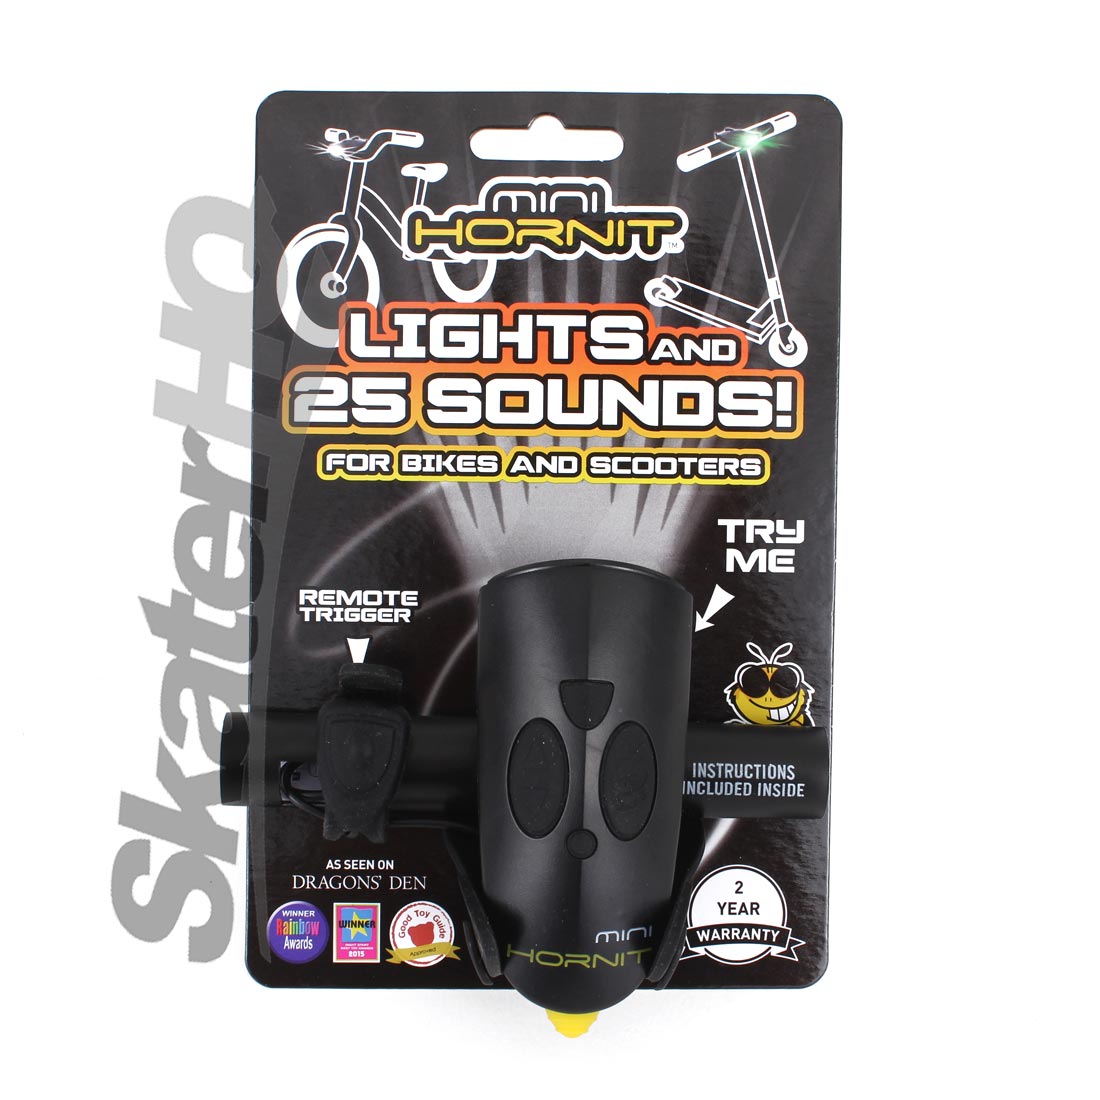 Hornit Mini Noise Maker &amp; Light - Black/Yellow Scooter Accessories